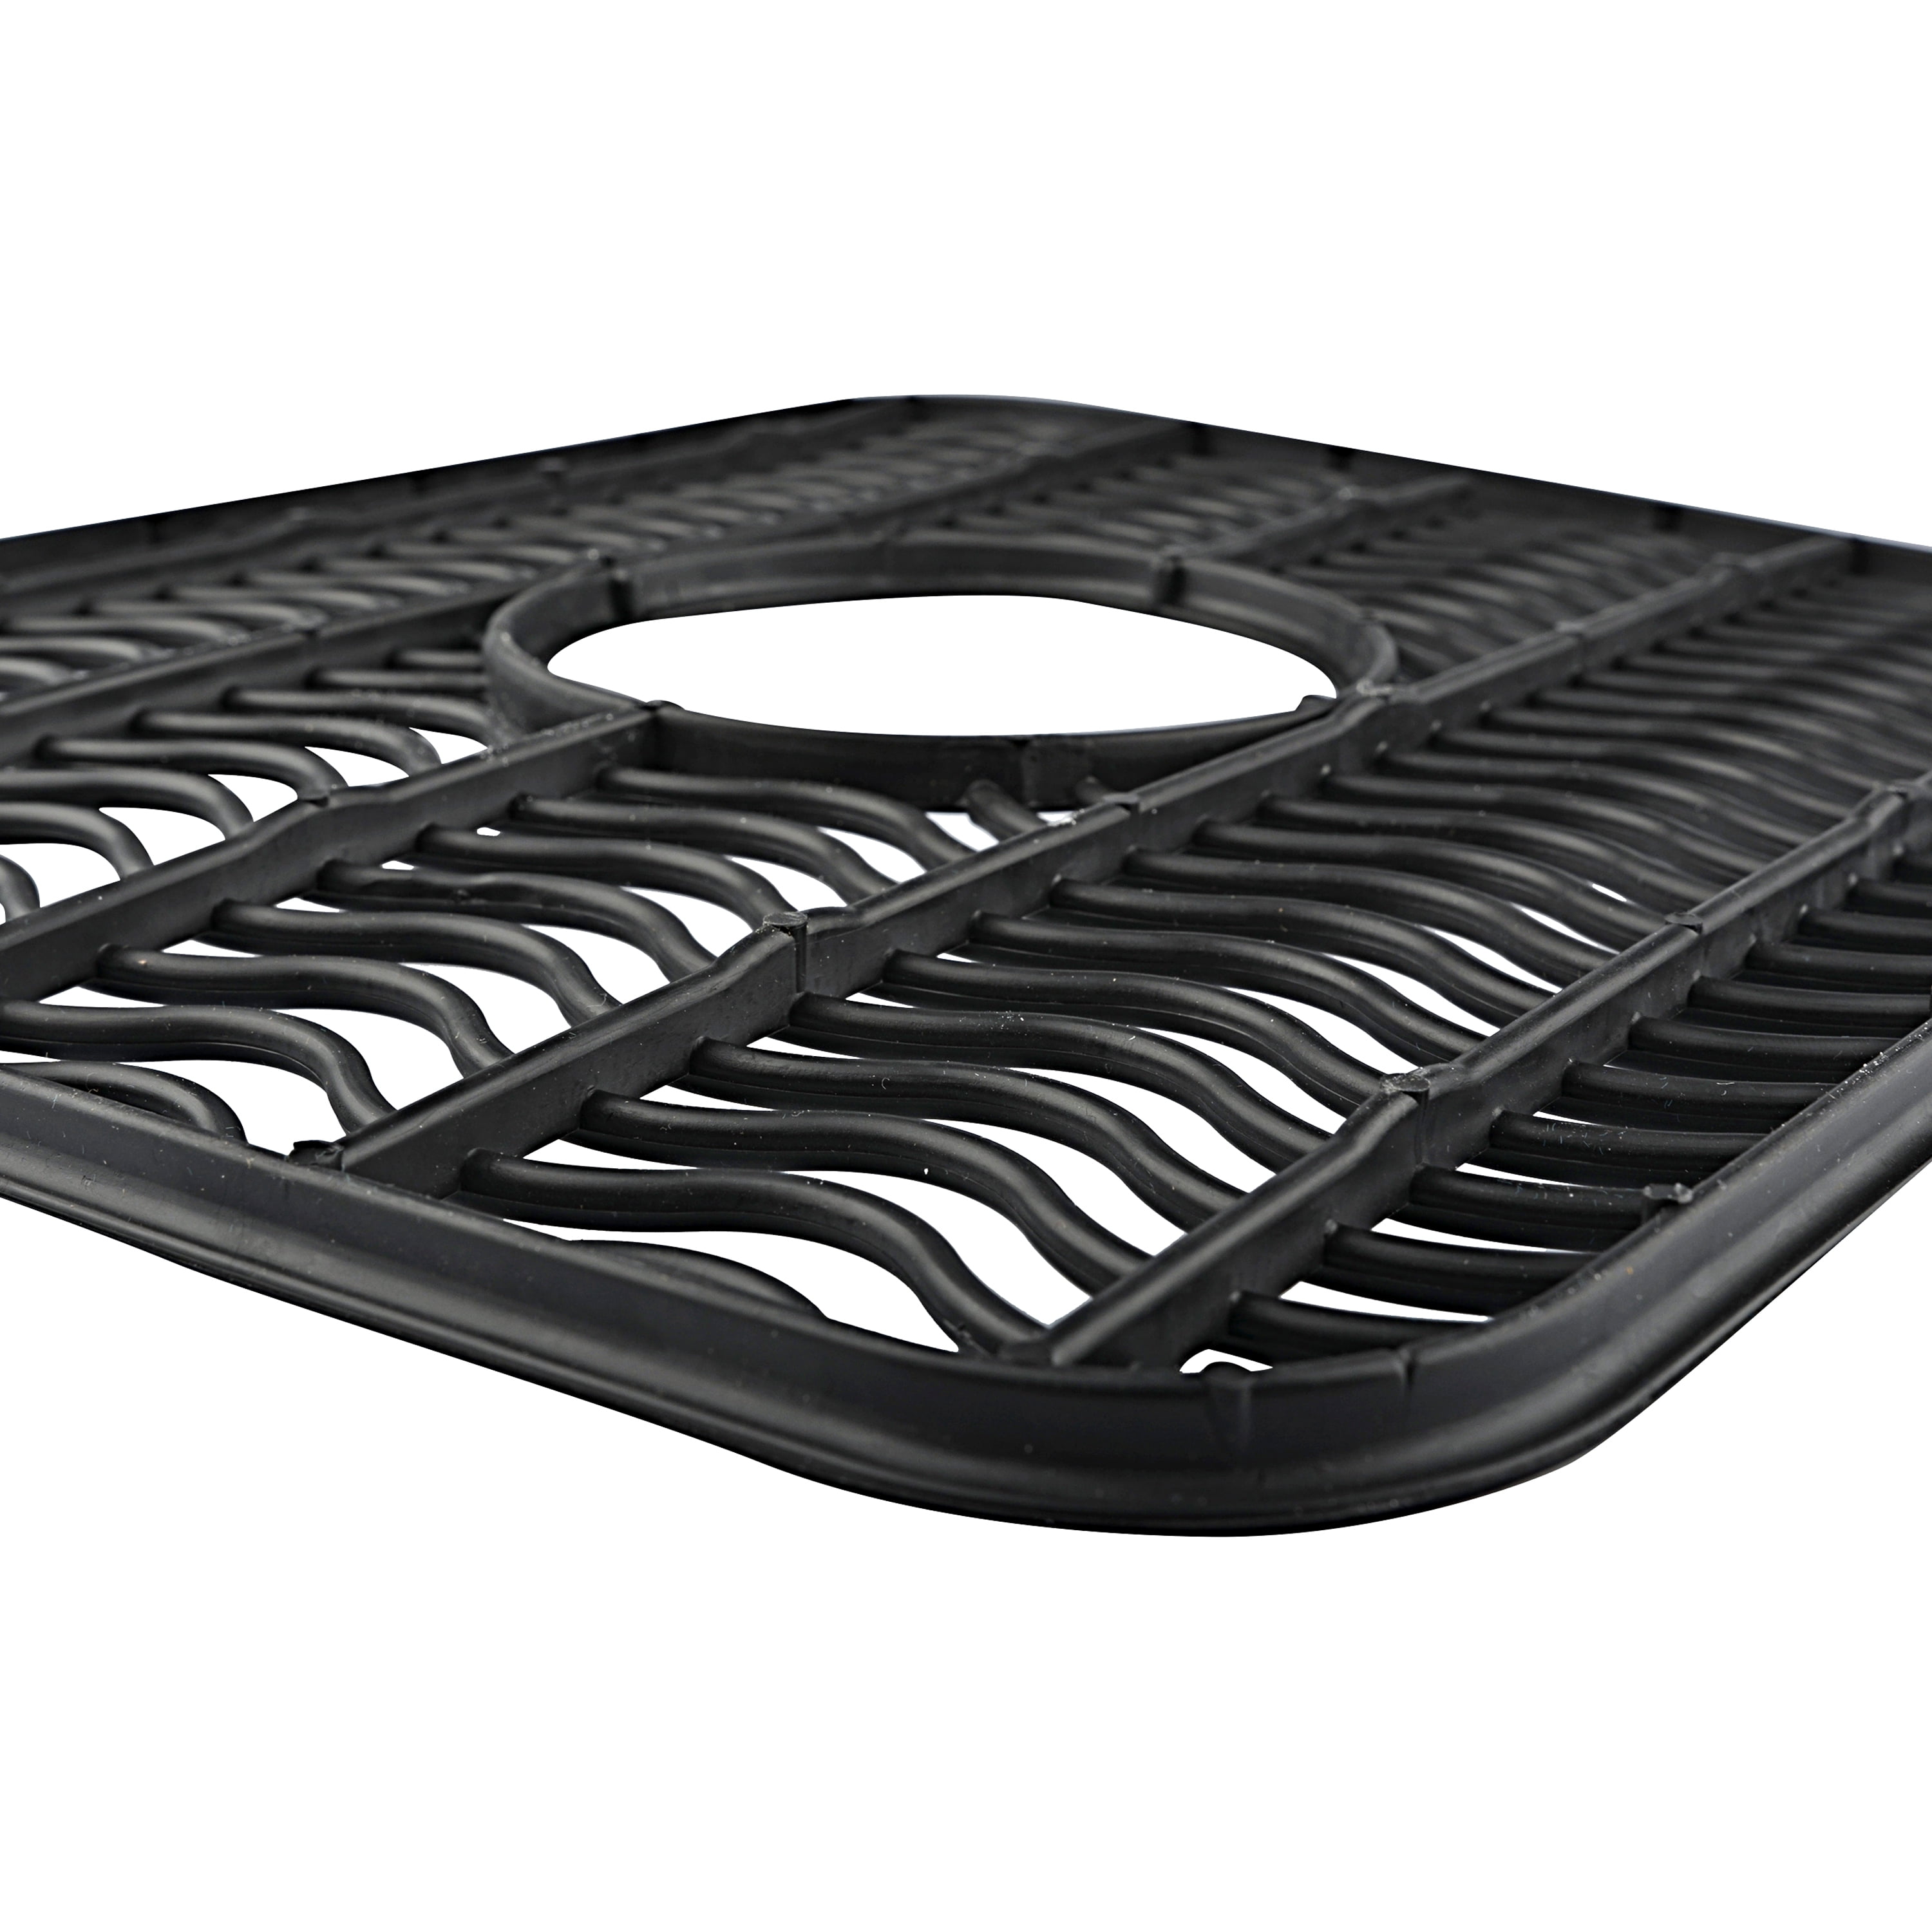 Rubbermaid Antimicrobial Kitchen Sink Protector Mat Flexible Small Black Waves 